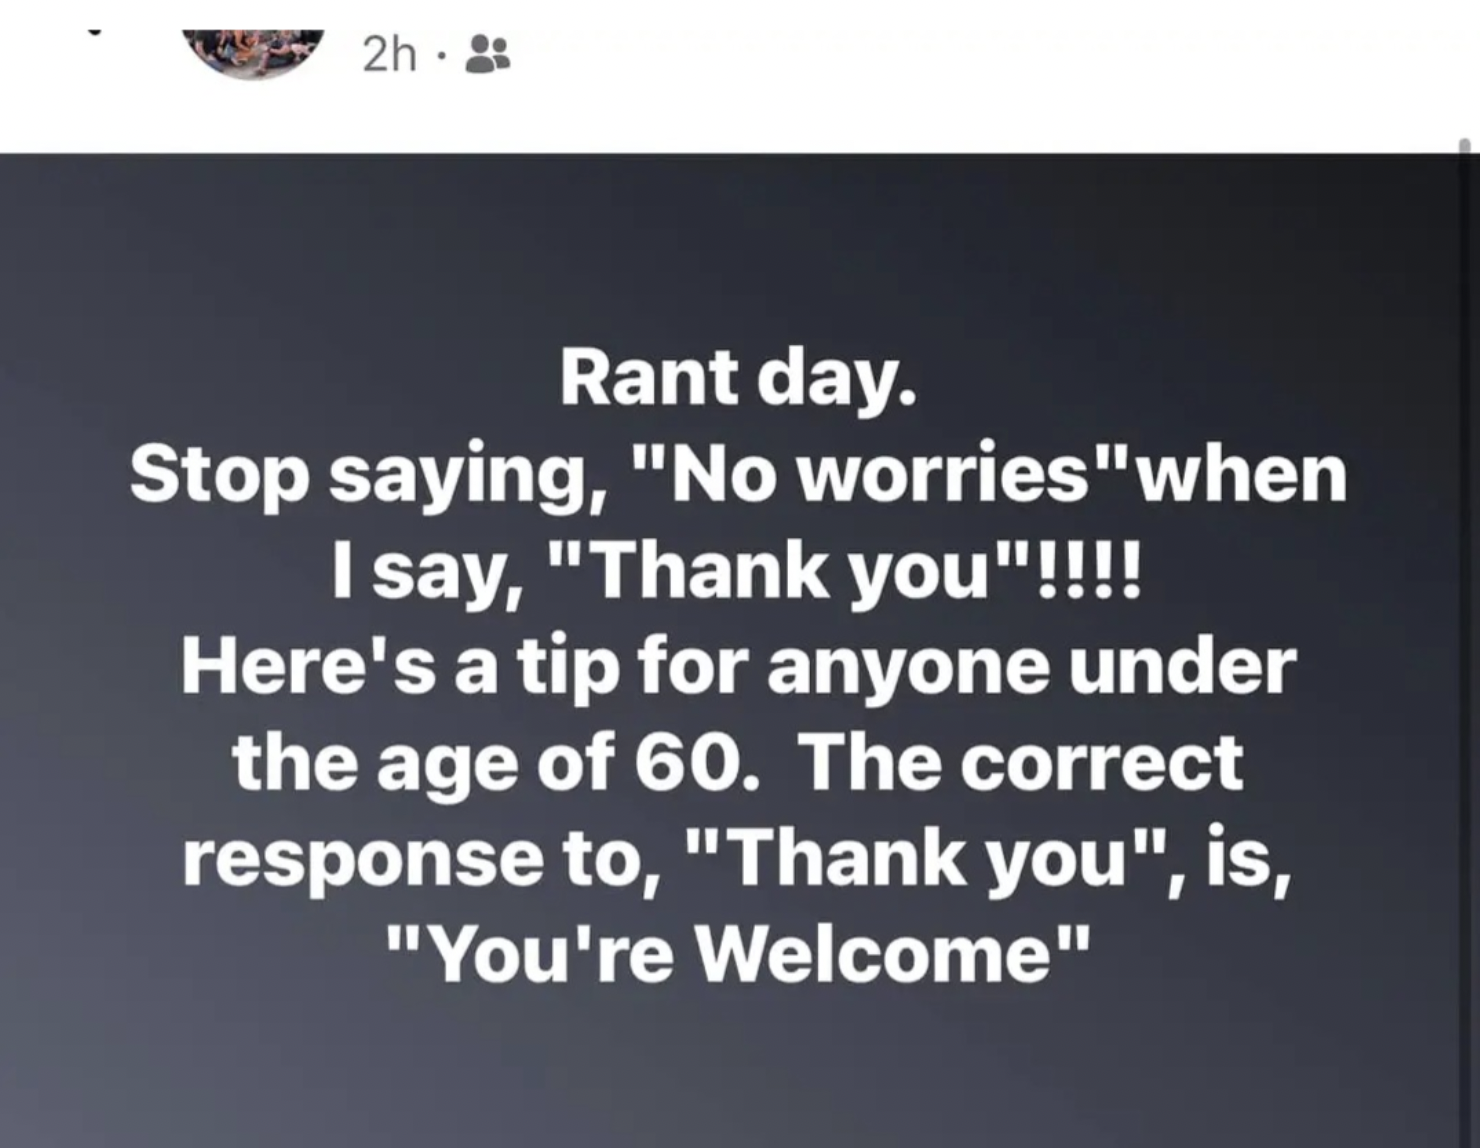 material - 2h Rant day. Stop saying, "No worries "when I say, "Thank you"!!!! Here's a tip for anyone under the age of 60. The correct response to, "Thank you", is, "You're Welcome"